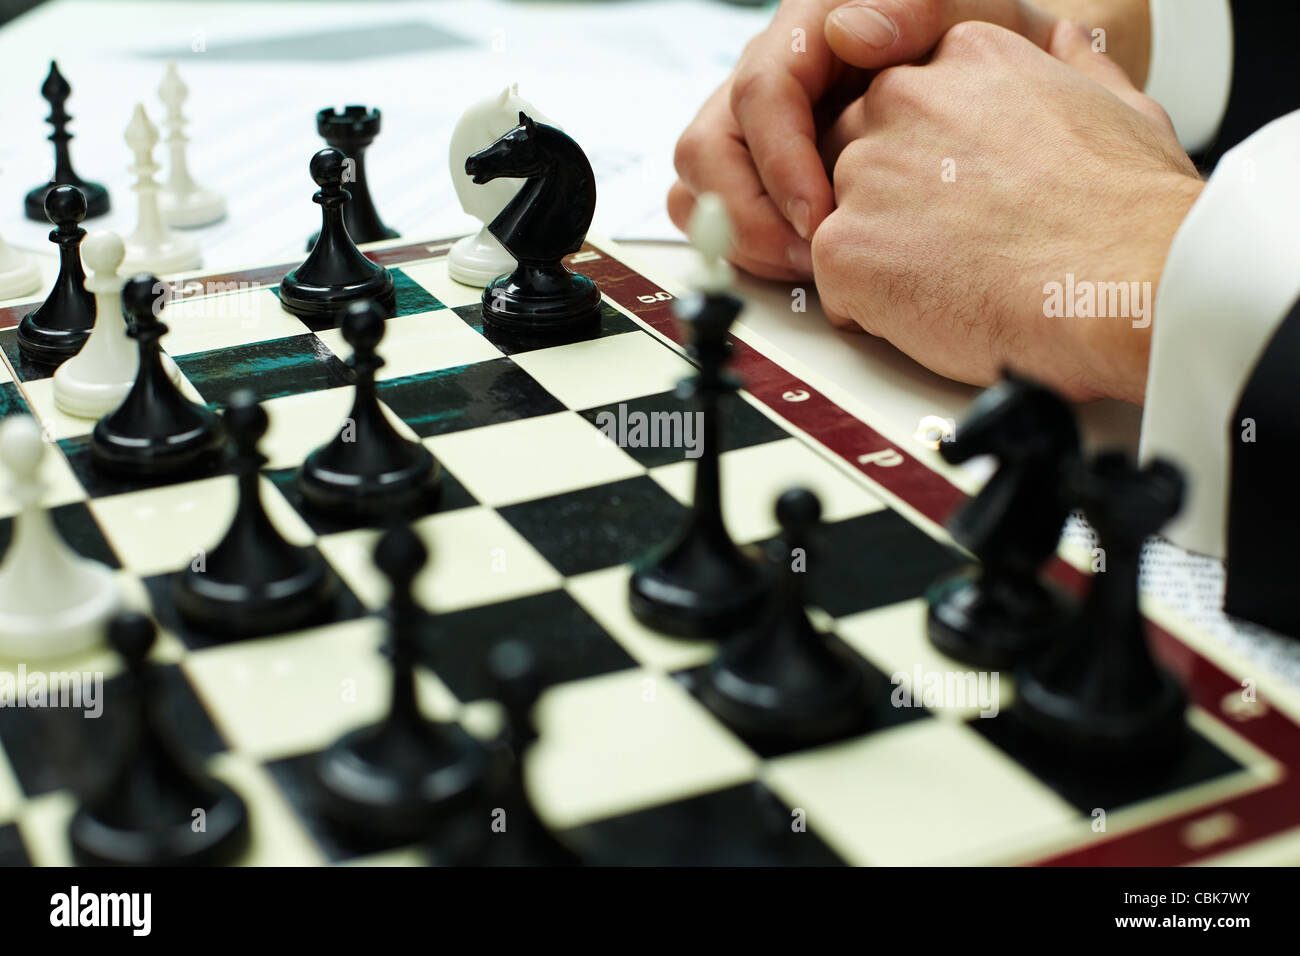 Image of chess figures on chessboard with human hands near by Stock Photo